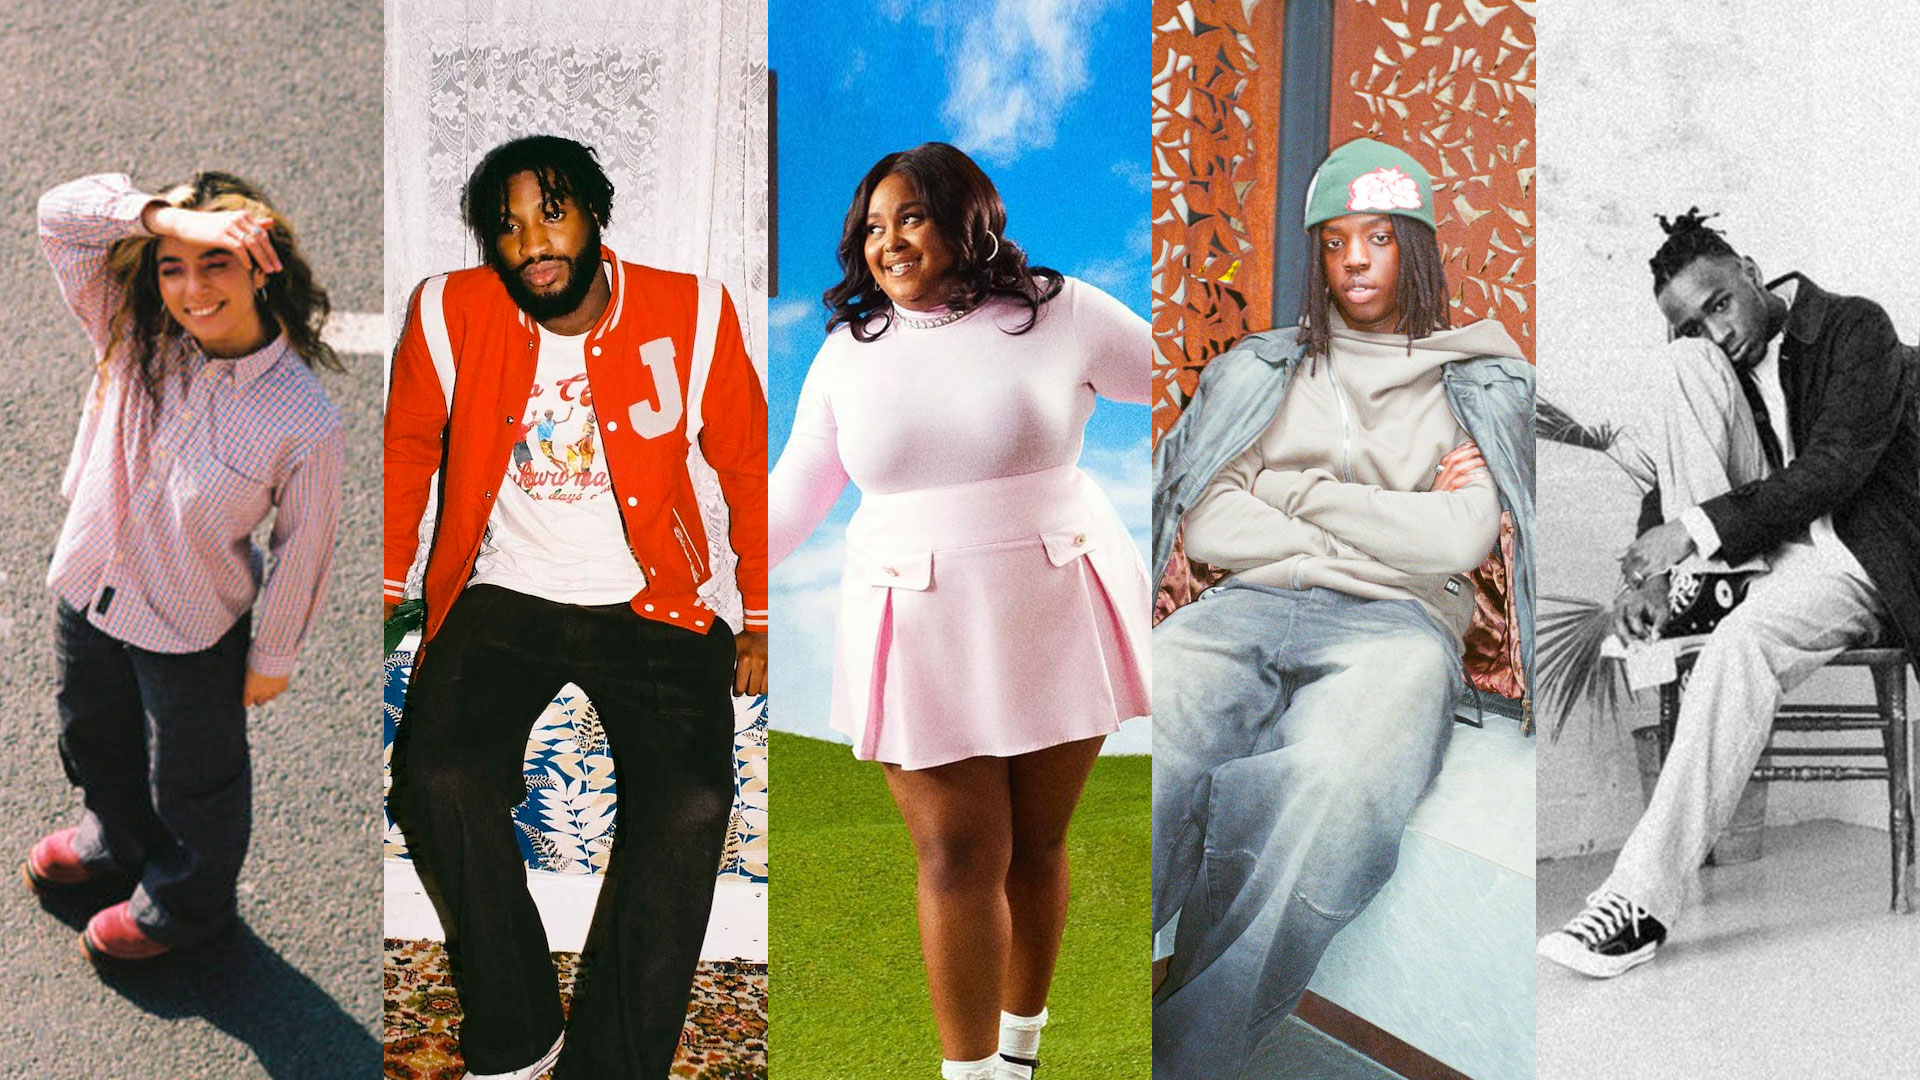 RE-UP – The new releases you need on your playlist featuring [@iamodeal], [@mightbechrissi], [@jasminejethwa_], [@SamDotia], [@bibsama] & more